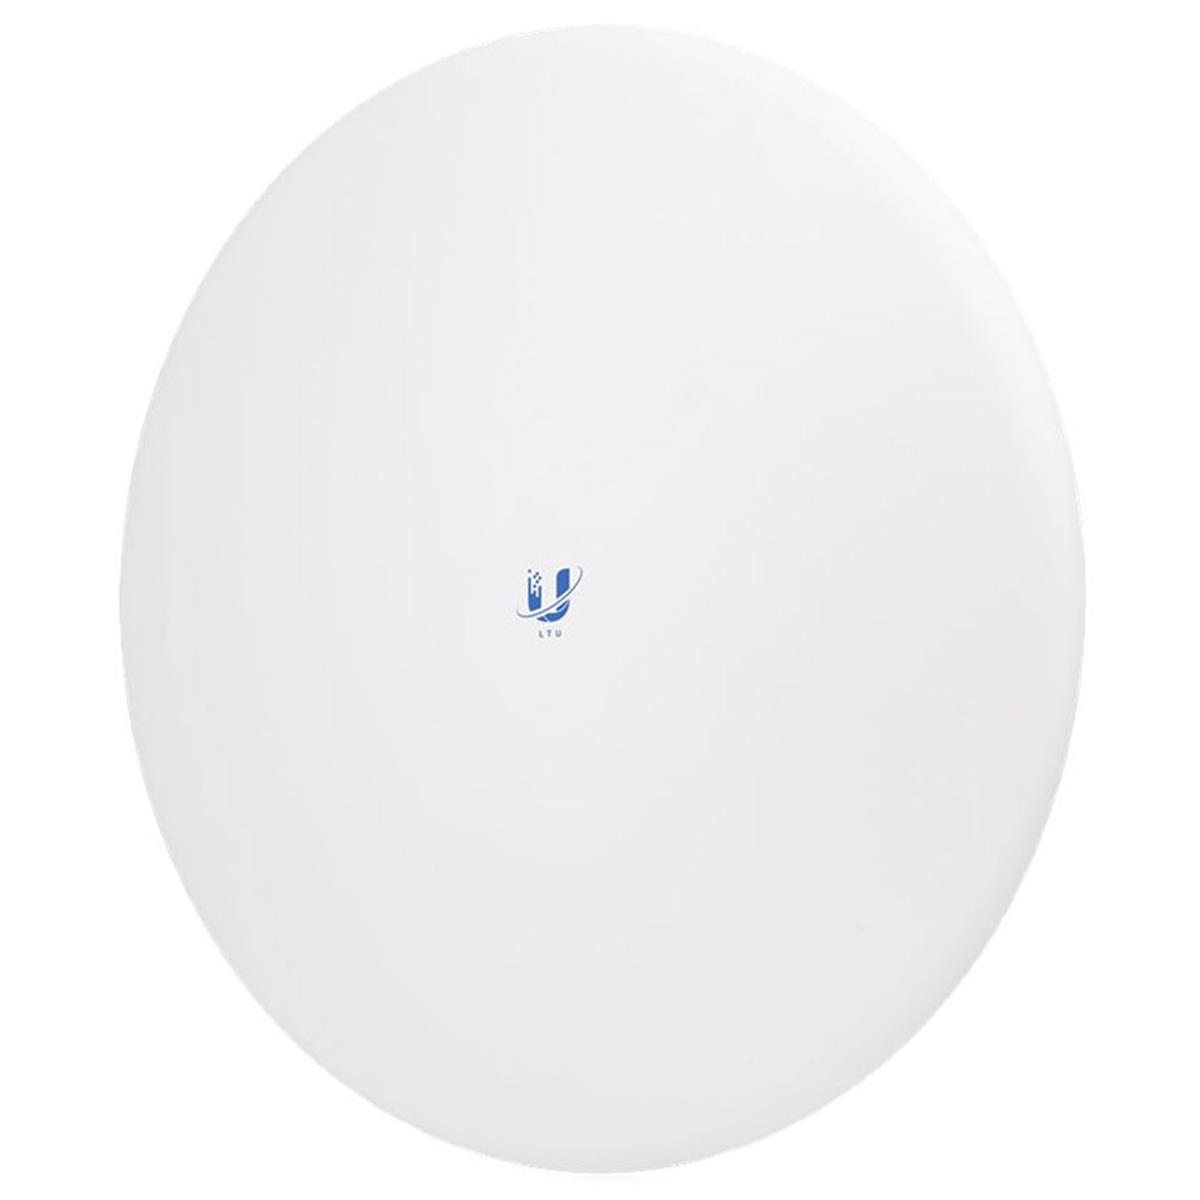 Image of Ubiquiti Networks LTU Pro 5GHz PtMP Radio Client with Advanced RF Performance